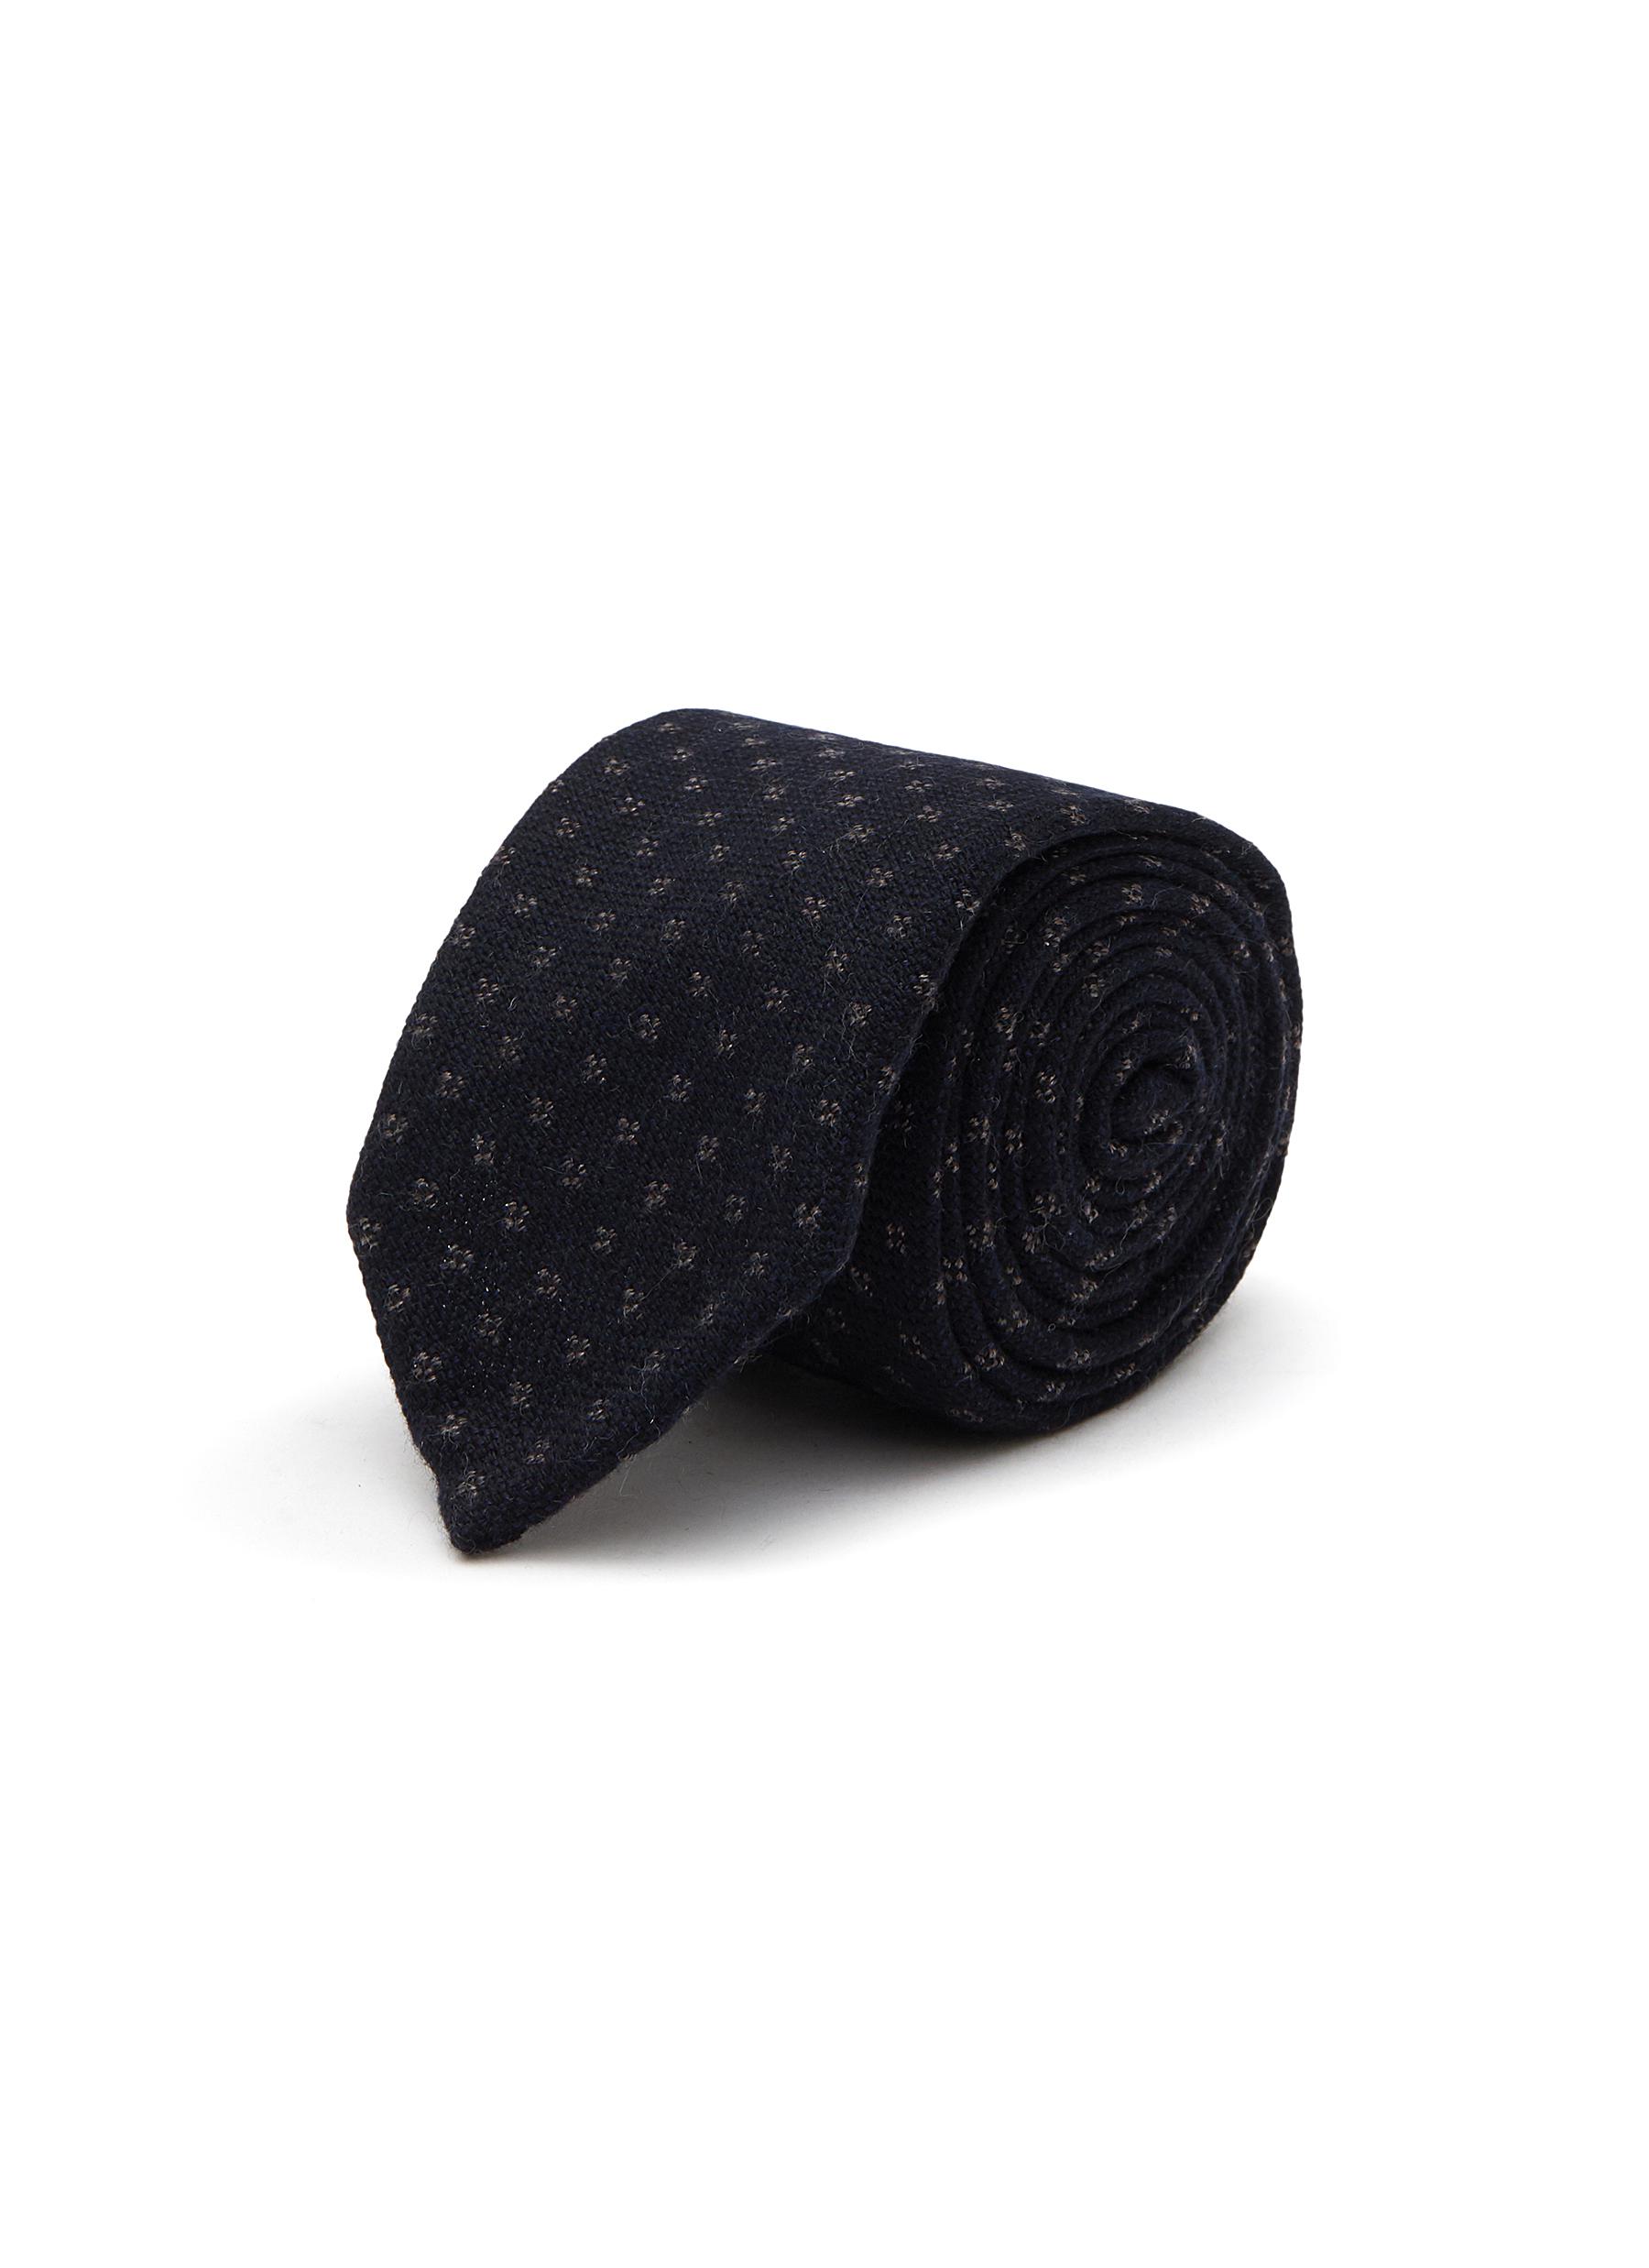 DOT MOTIF UNLINED KNITTED CASHMERE TIE